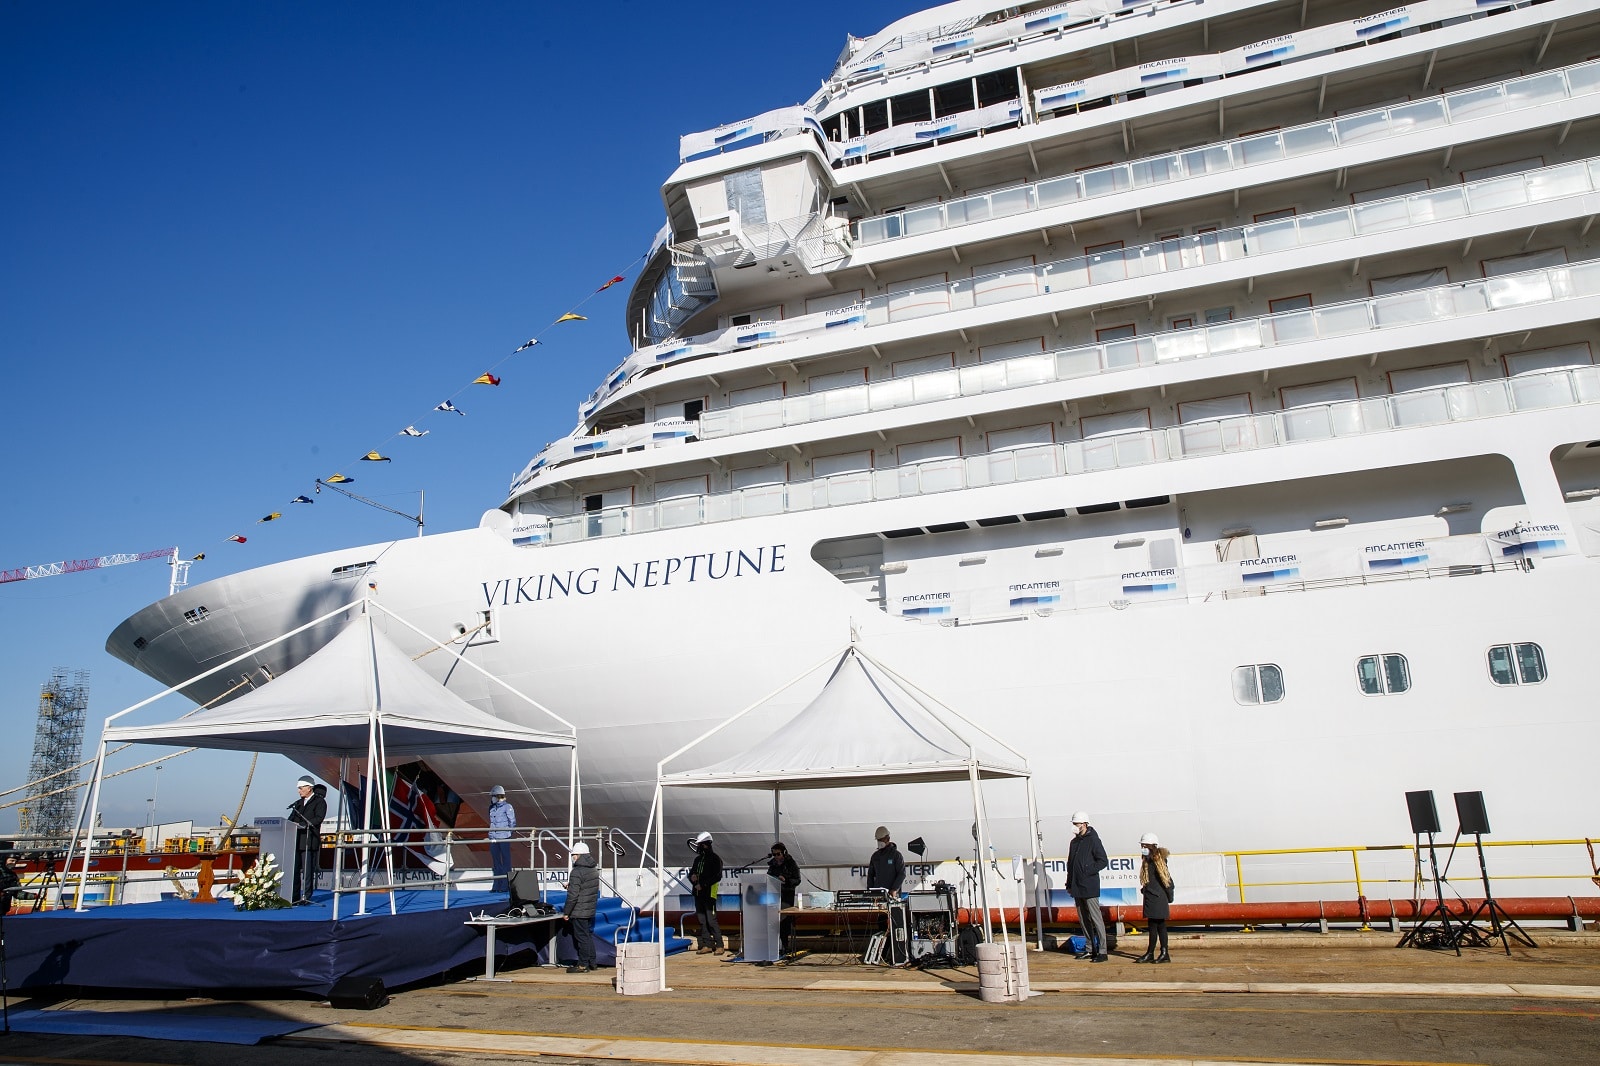 Viking's Newest Cruise Ship, Viking Neptune, Touches Water for First Time